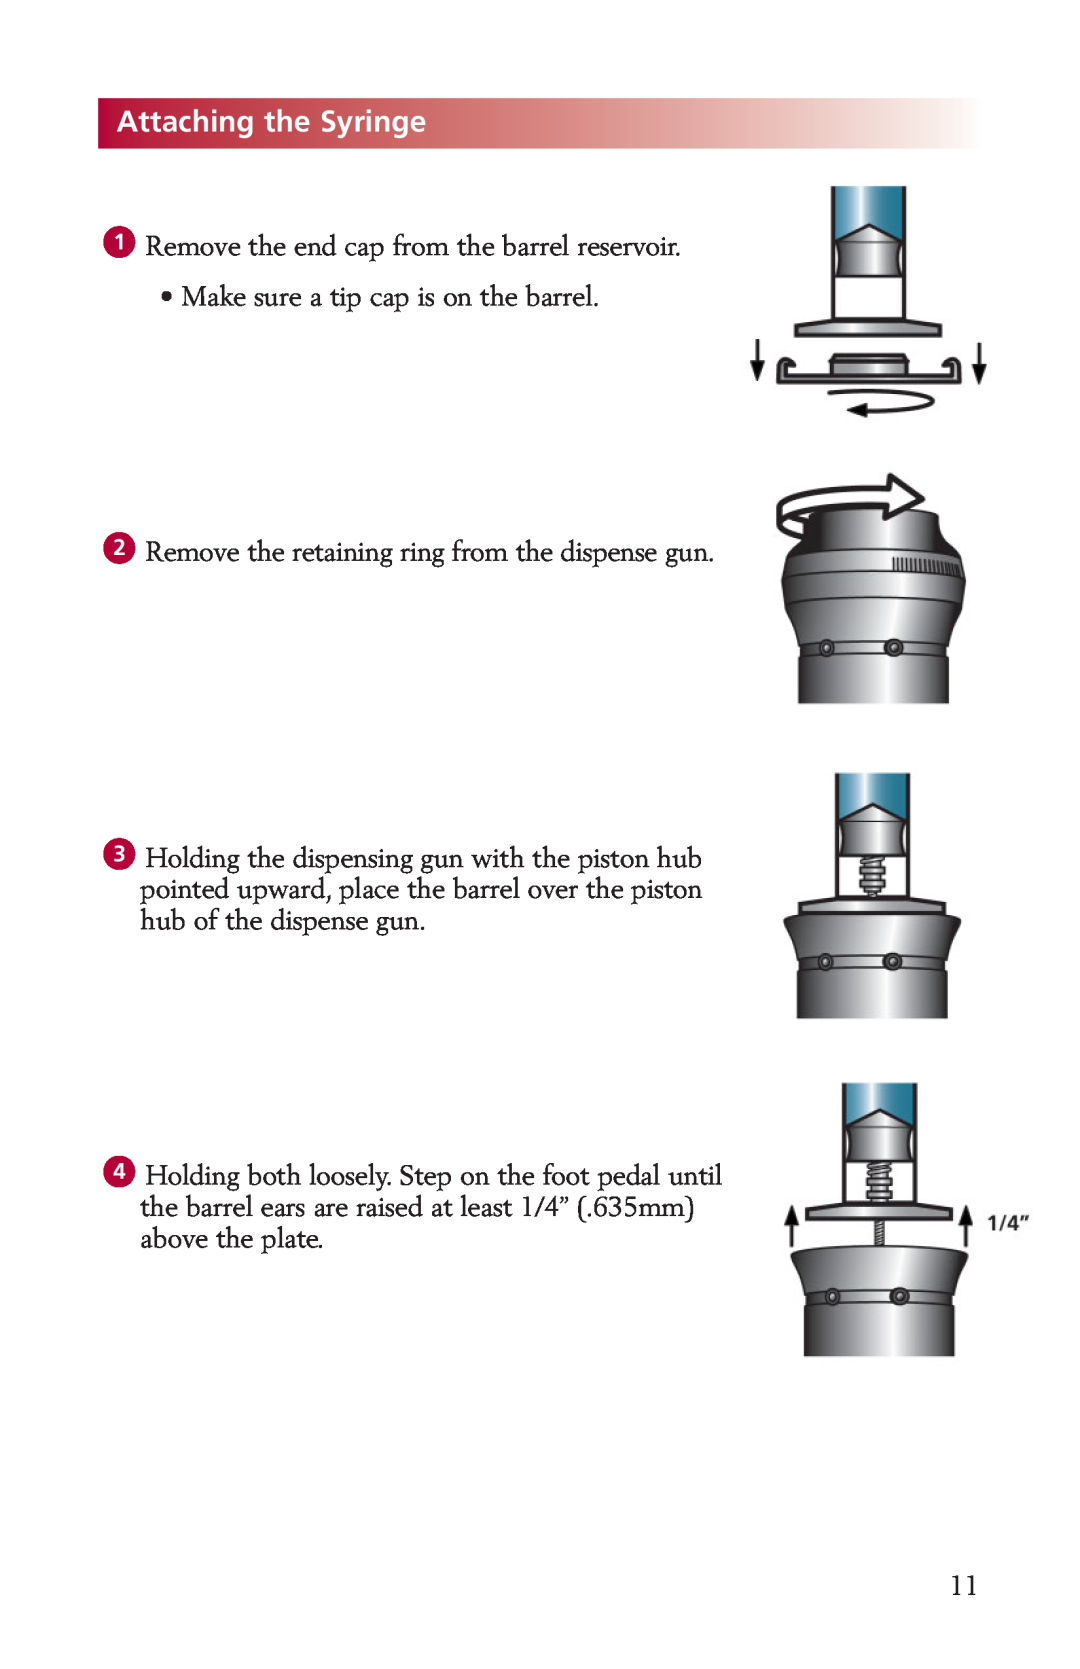 Fishman LDS9000 AttachingtheSyringe, 1Remove the end cap from the barrel reservoir, Make sure a tip cap is on the barrel 